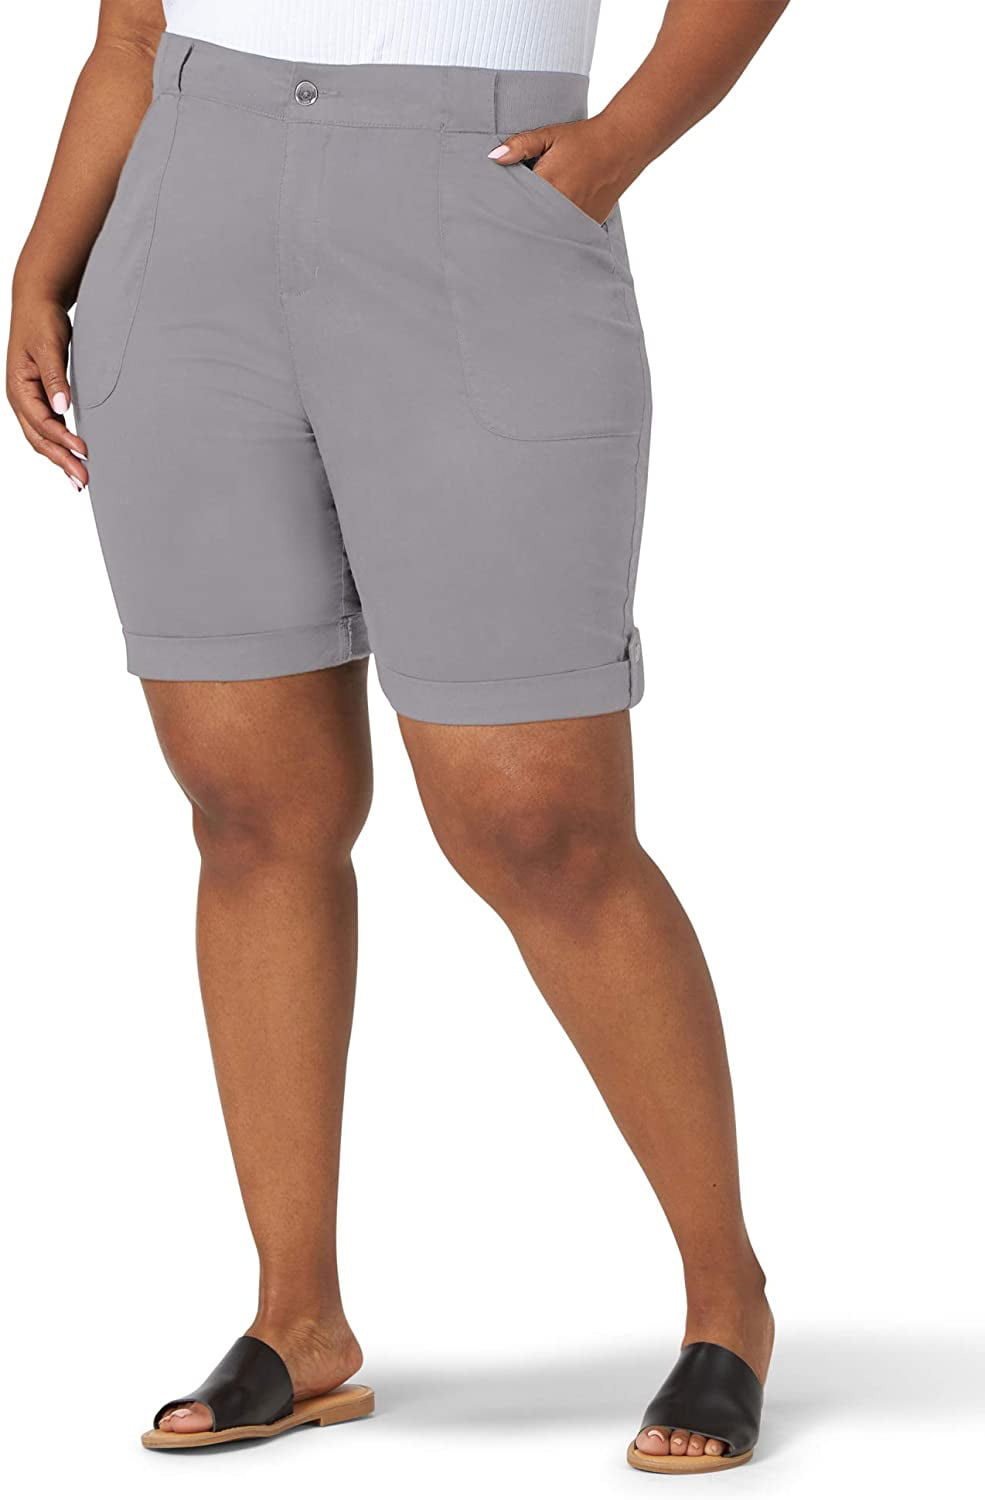 Lee Women's Flex-to-go Relaxed Fit Utility Bermuda Short 